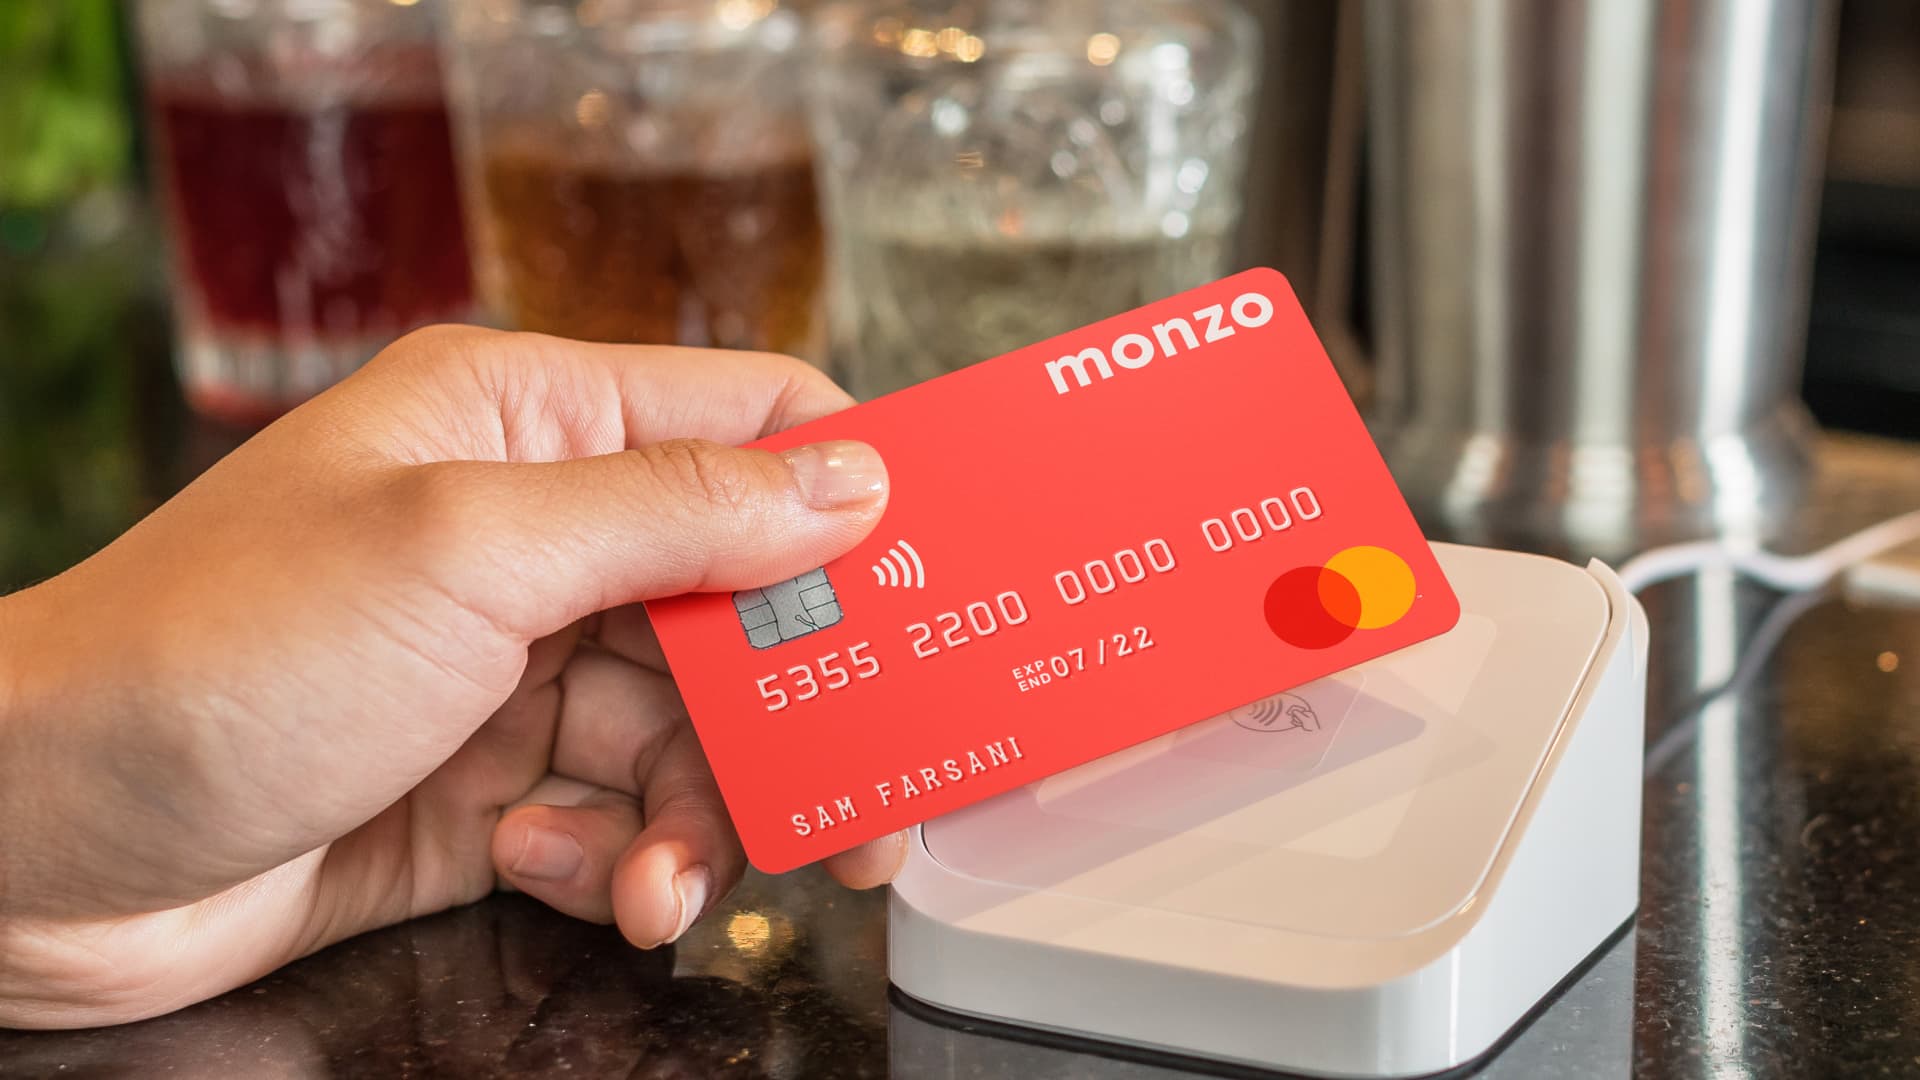 monzo-the-uk-challenger-bank-secures-430-million-in-funding